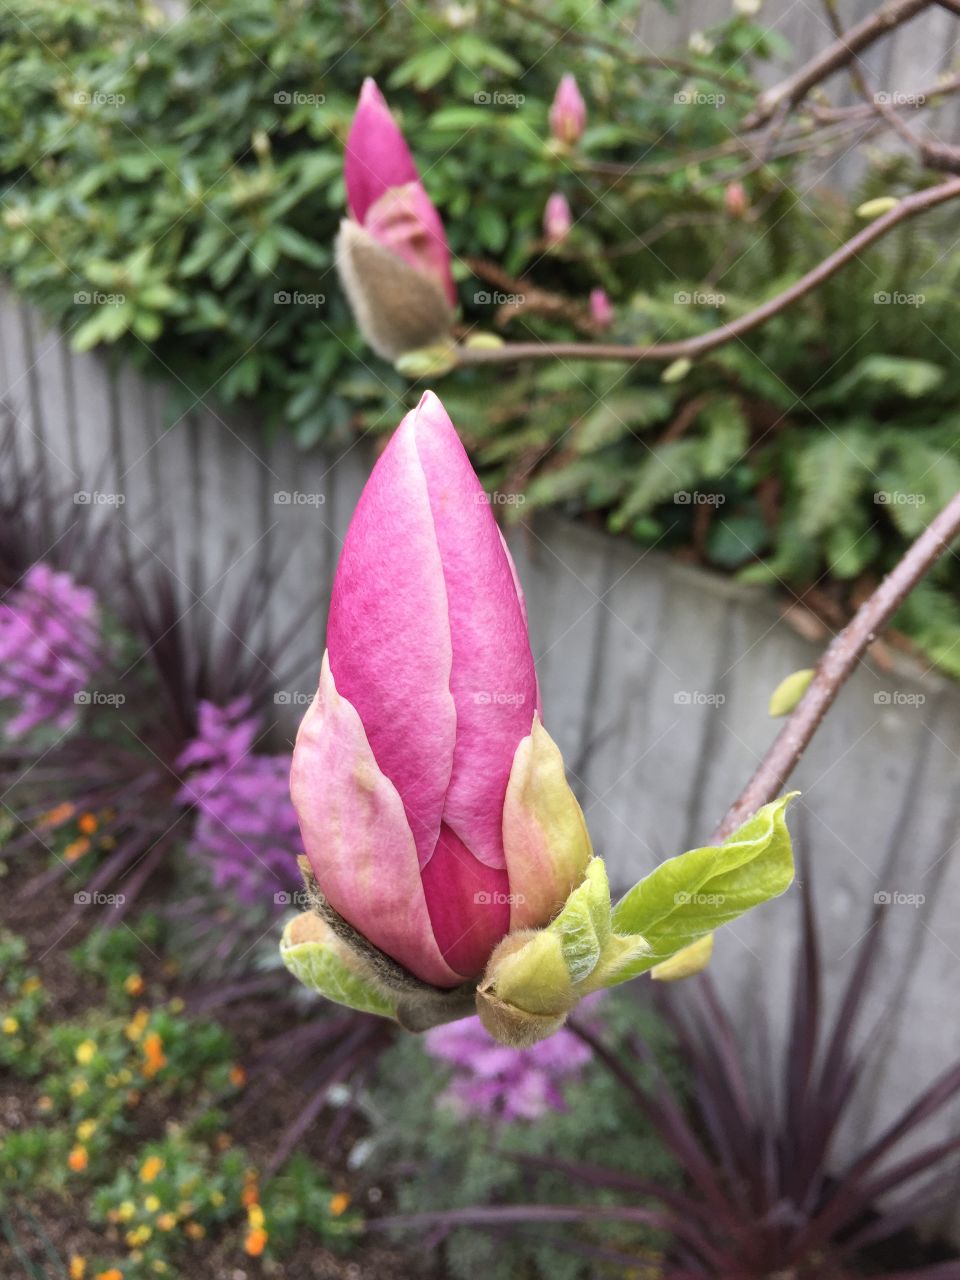 Early spring bud in Seattle